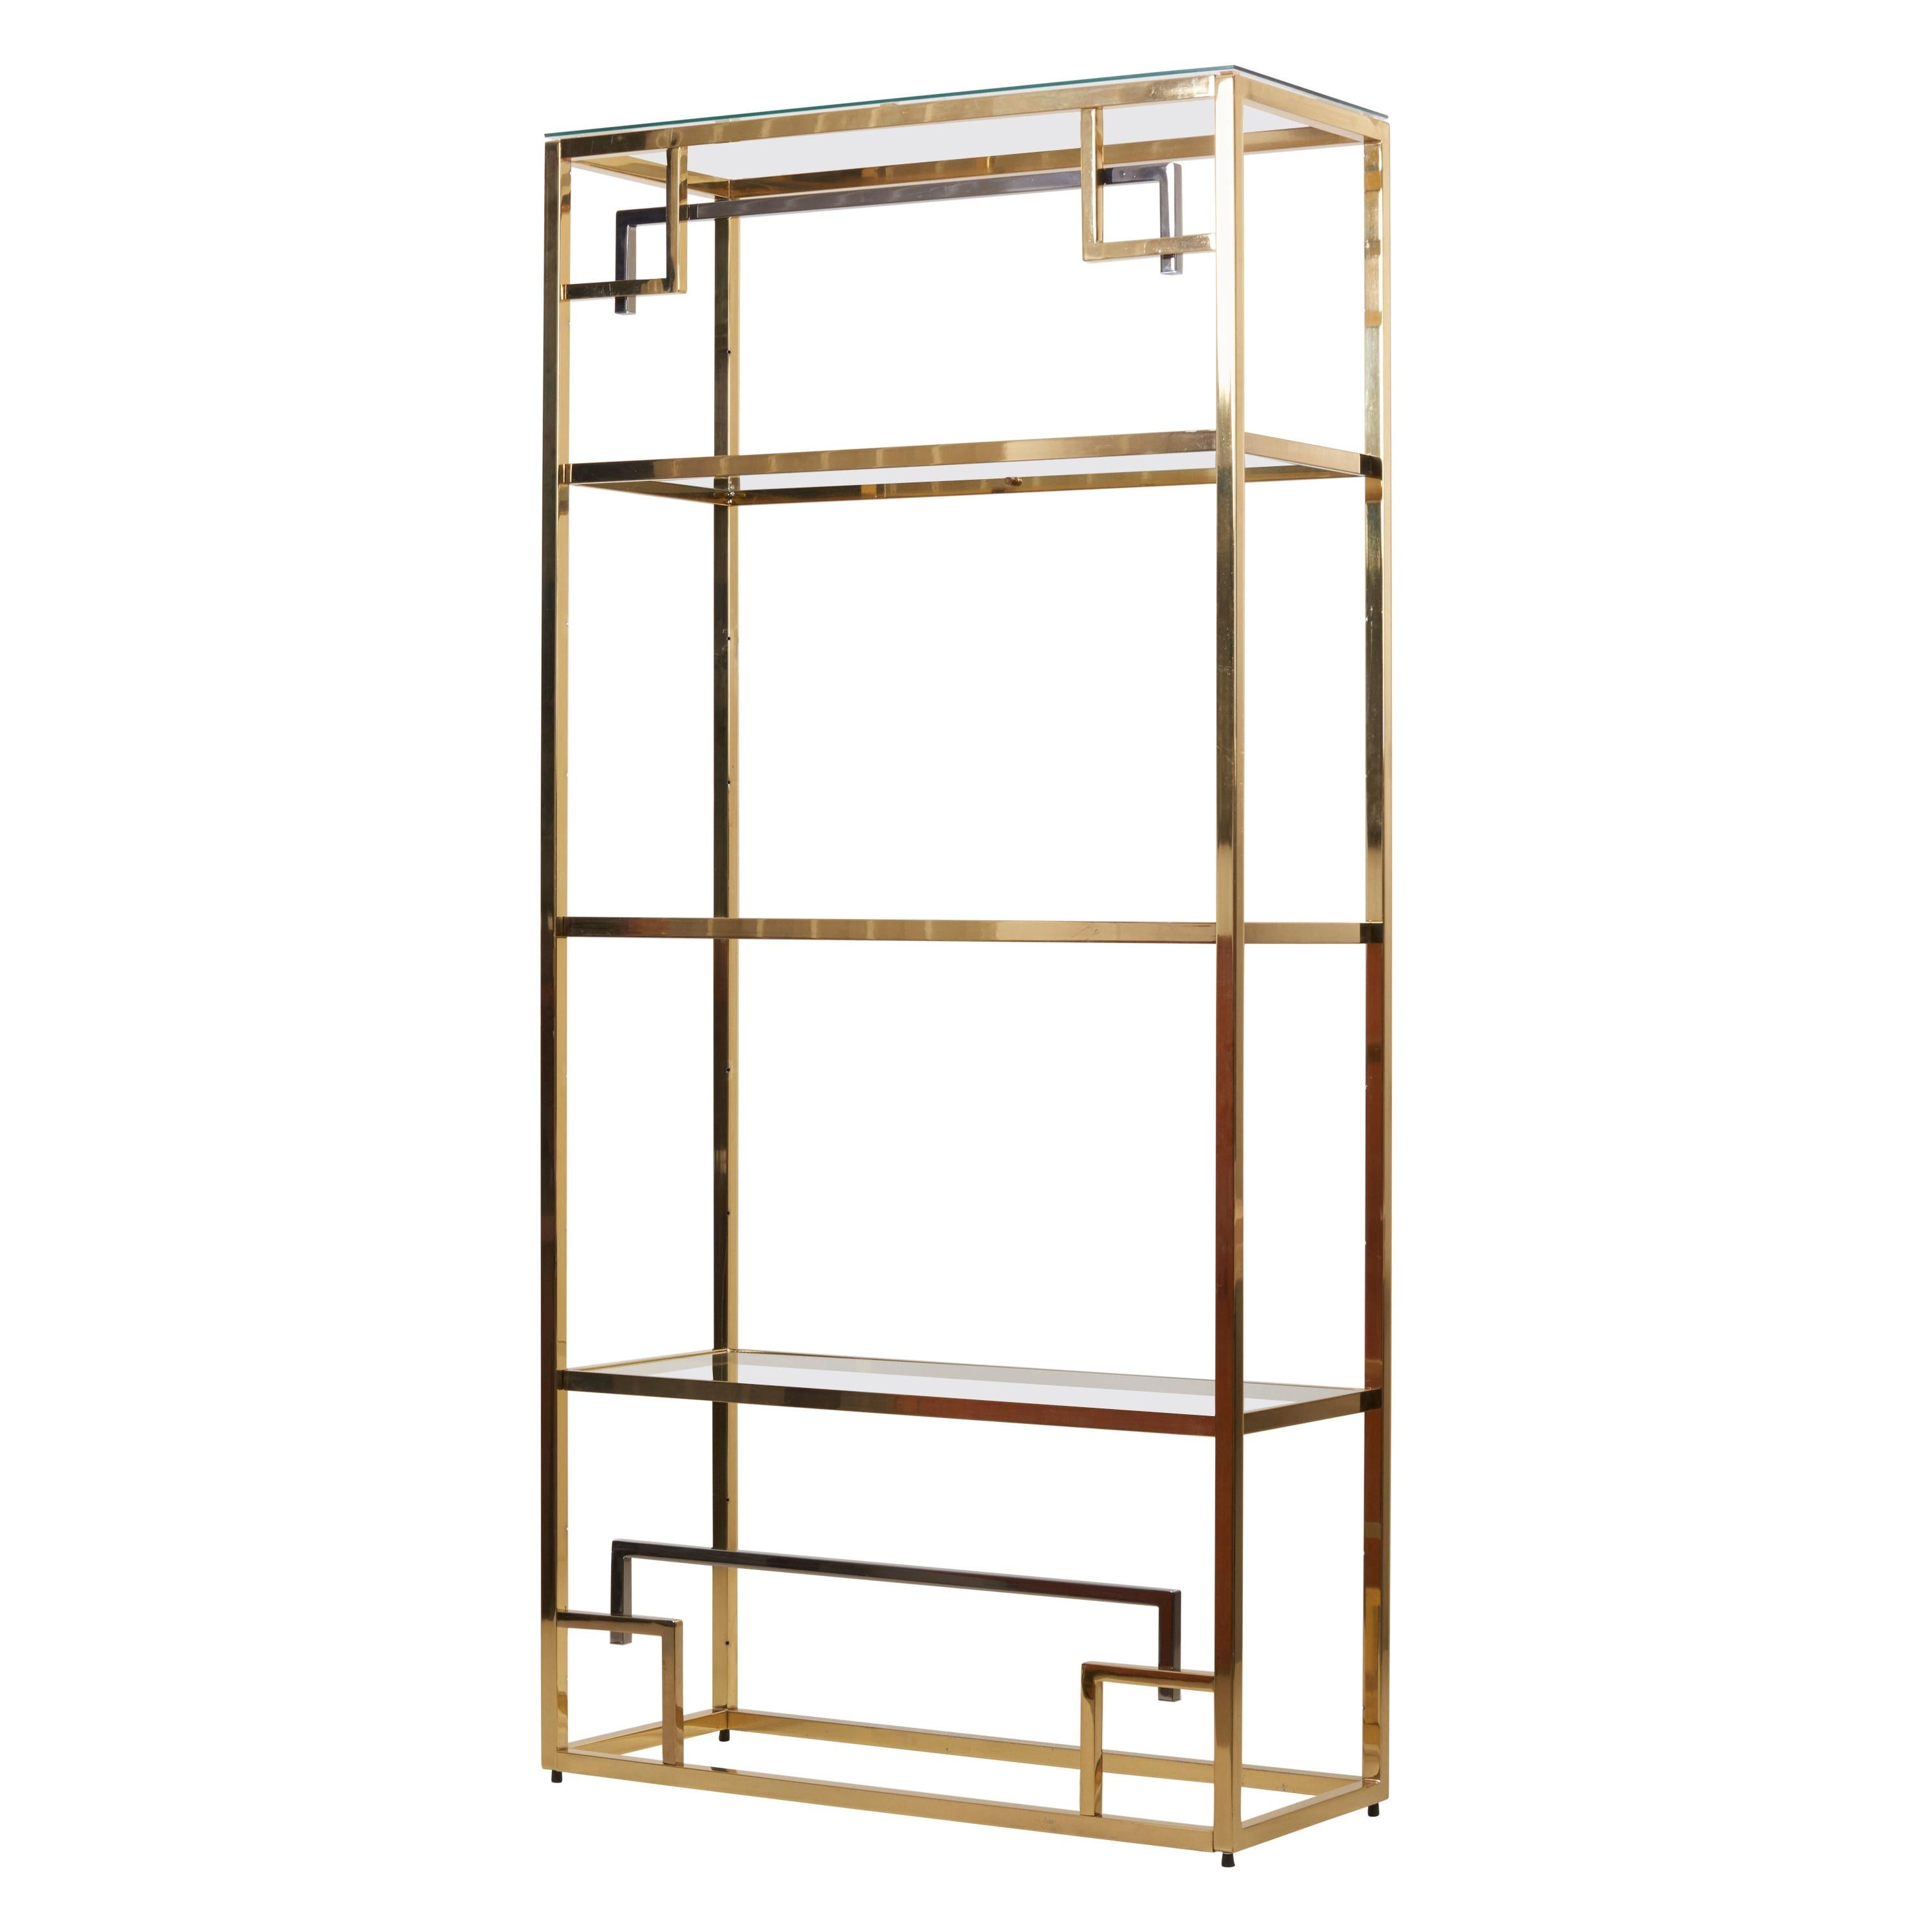 1 of 2 Brass and Gold-Plated Bookshelf or Étagère Attributed to Maison Jansen